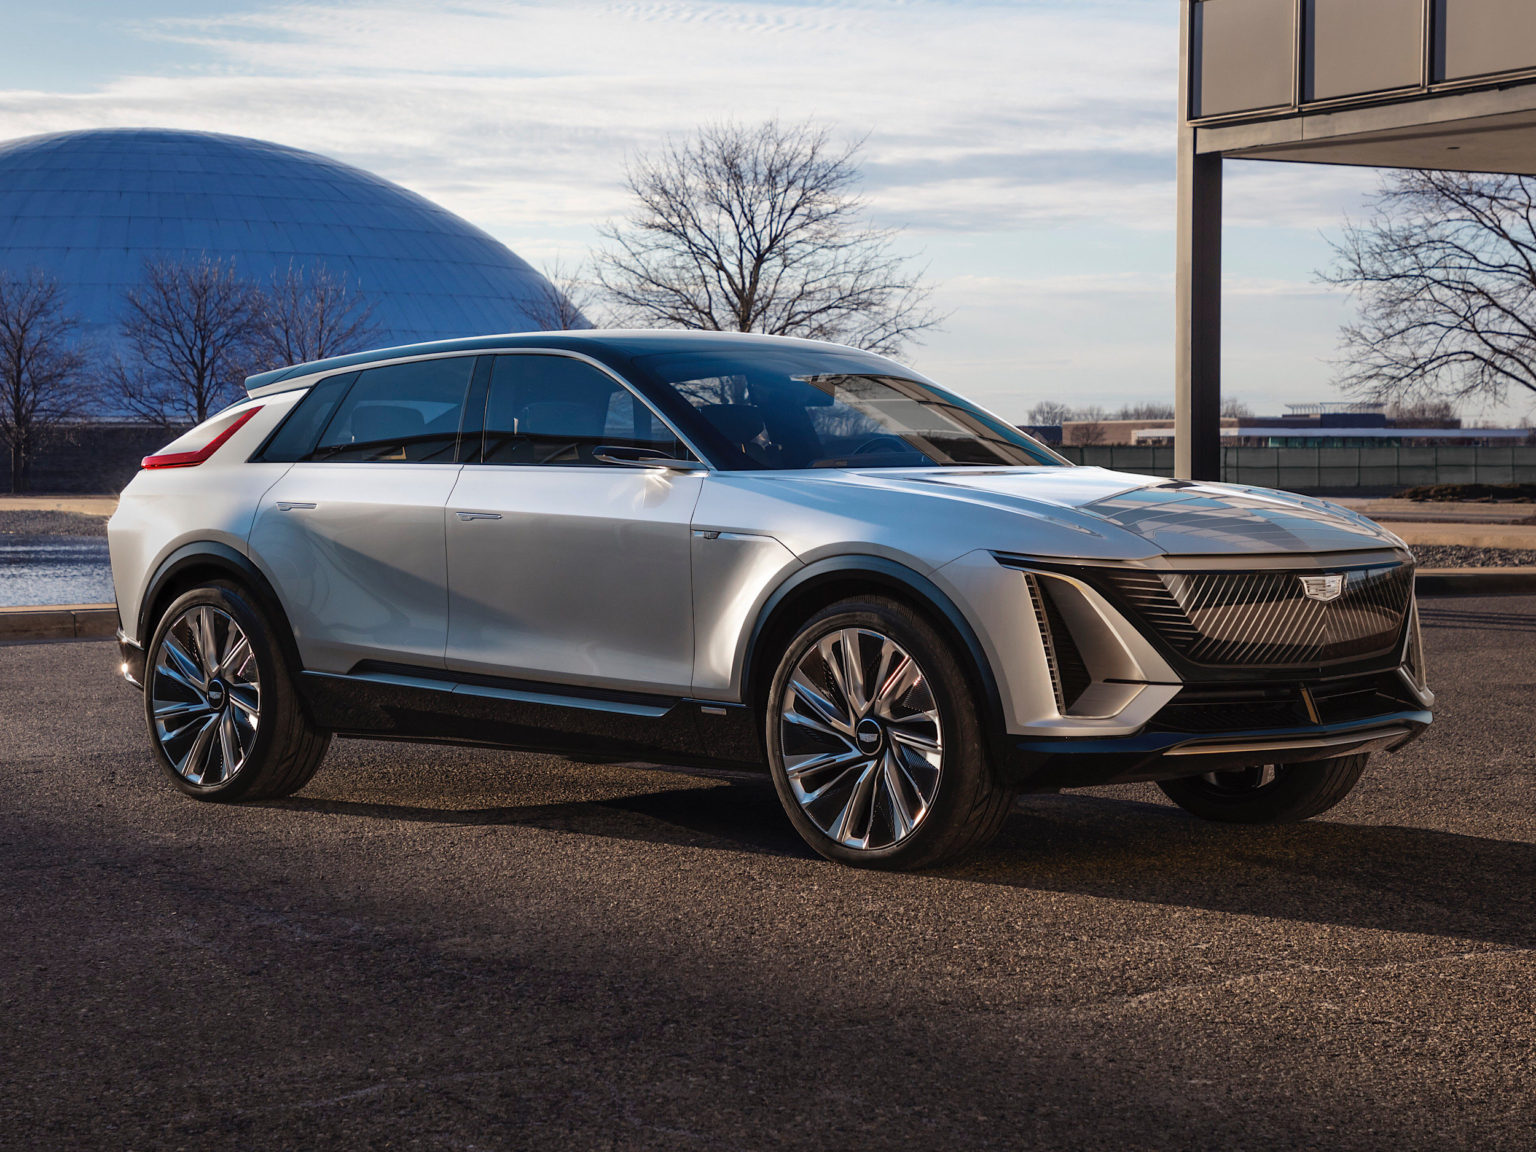 The 2021 Cadillac Lyriq is a whole new take on luxe mobility for the company.